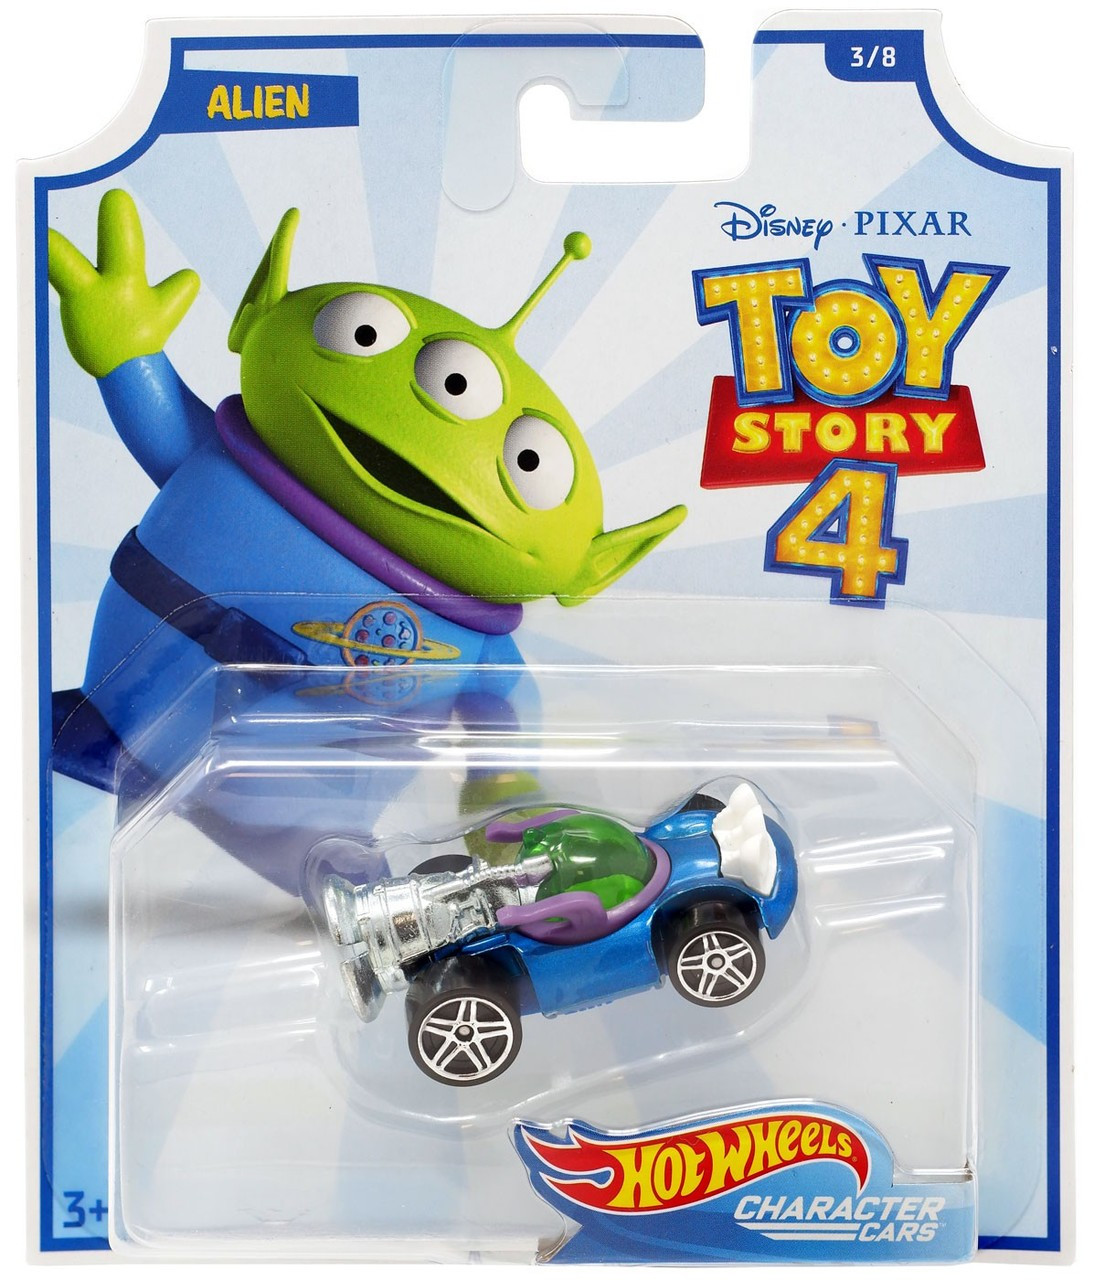 toy story 3 hot wheels